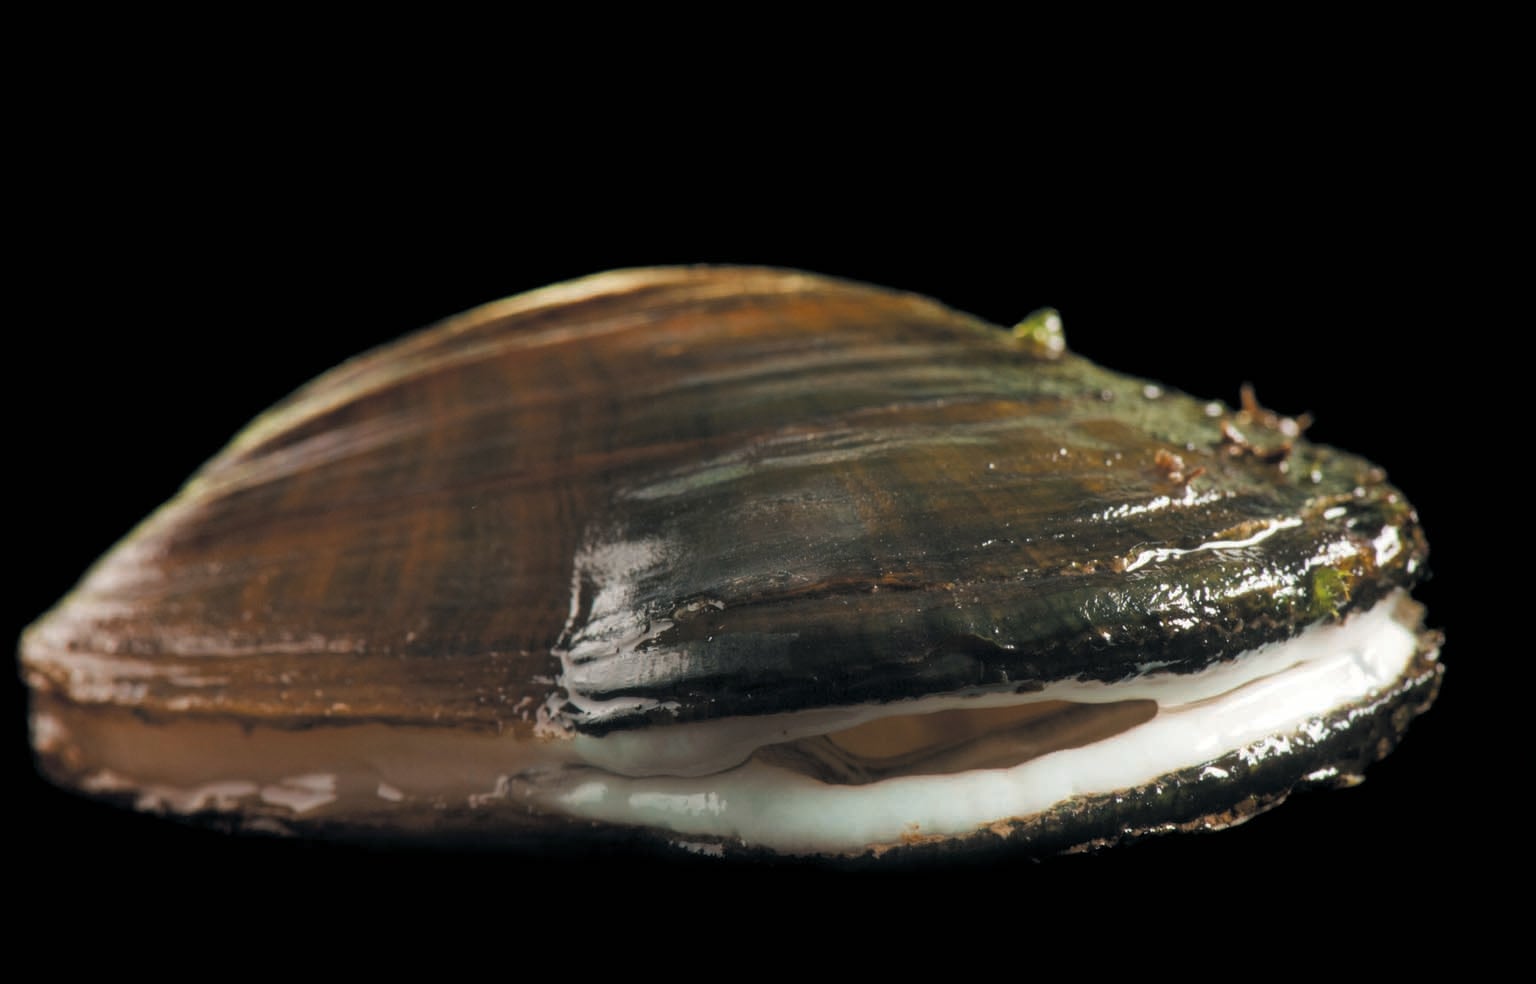 A brown and green mussel with light brown stripes shown against a black background.